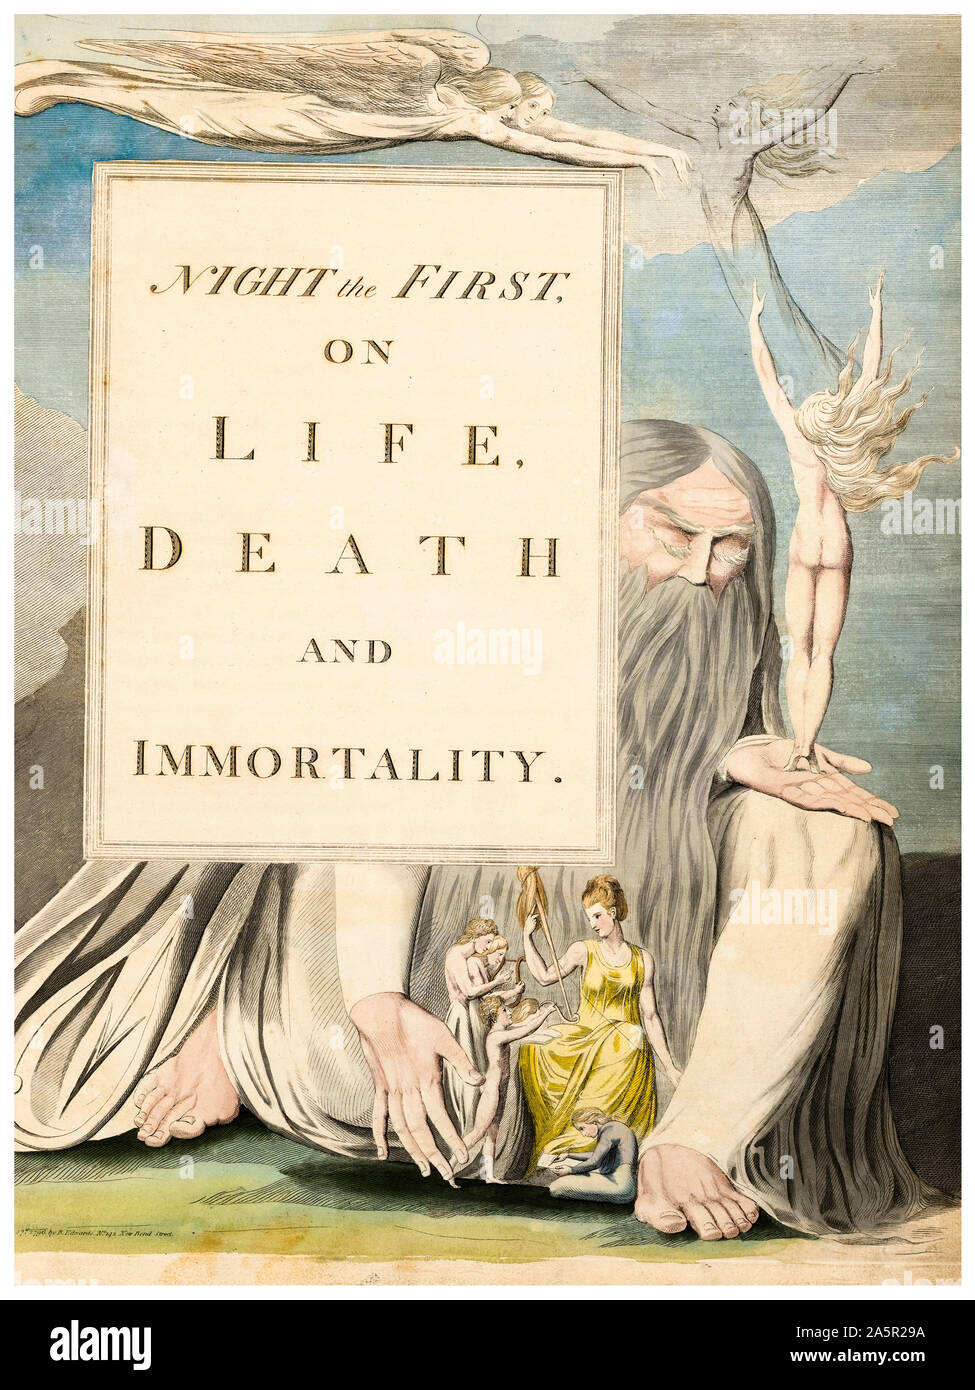 William Blake, Young's Night Thoughts, Title Page, 'Night the First, on Life, Death and Immortality.', painting, relief etching, hand coloured, illustration 1797 Stock Photo